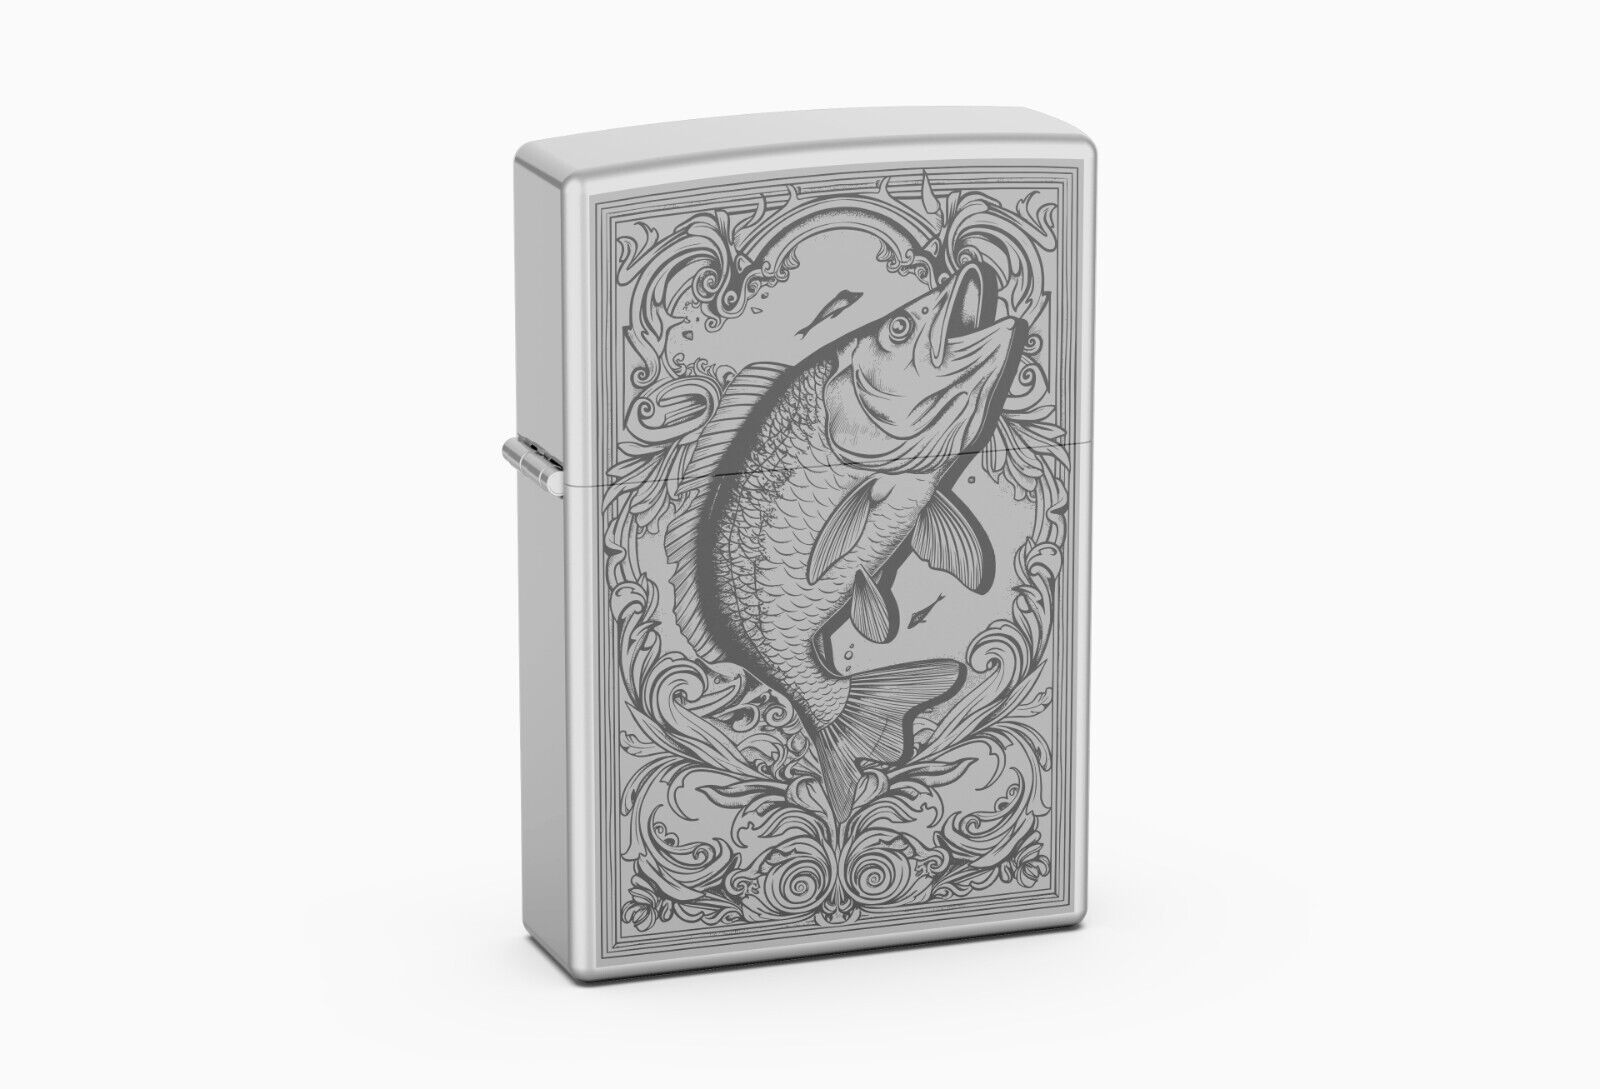 Customized Zippo Lighter with Fish Engraving - Perfect Gifts for Groomsmen & Dad